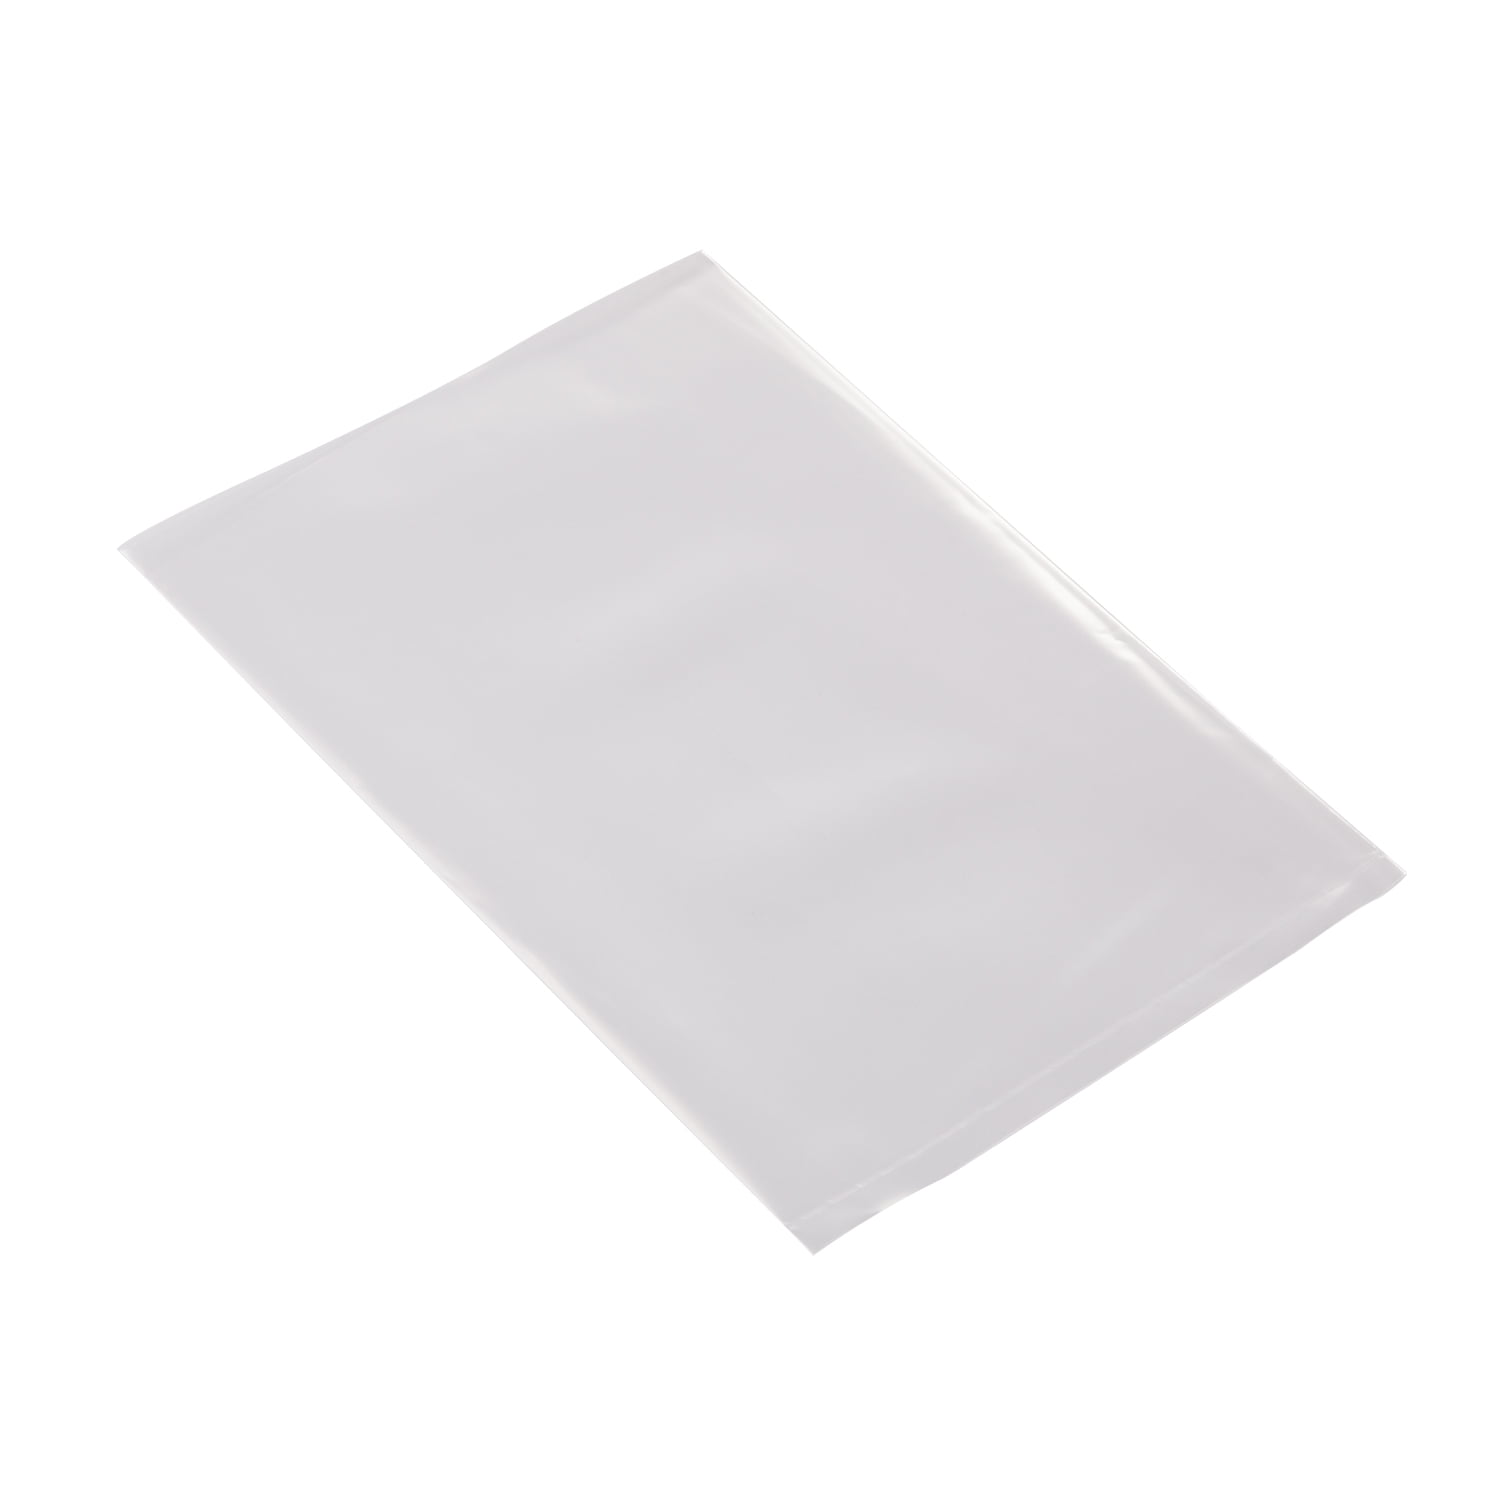 Cookie Clear Plastic Apparel Envelopes 4 x 6 Inches, Pack of 500 Owlpack 3 Mil Poly Bag with Open End Candy and Treat Bags 